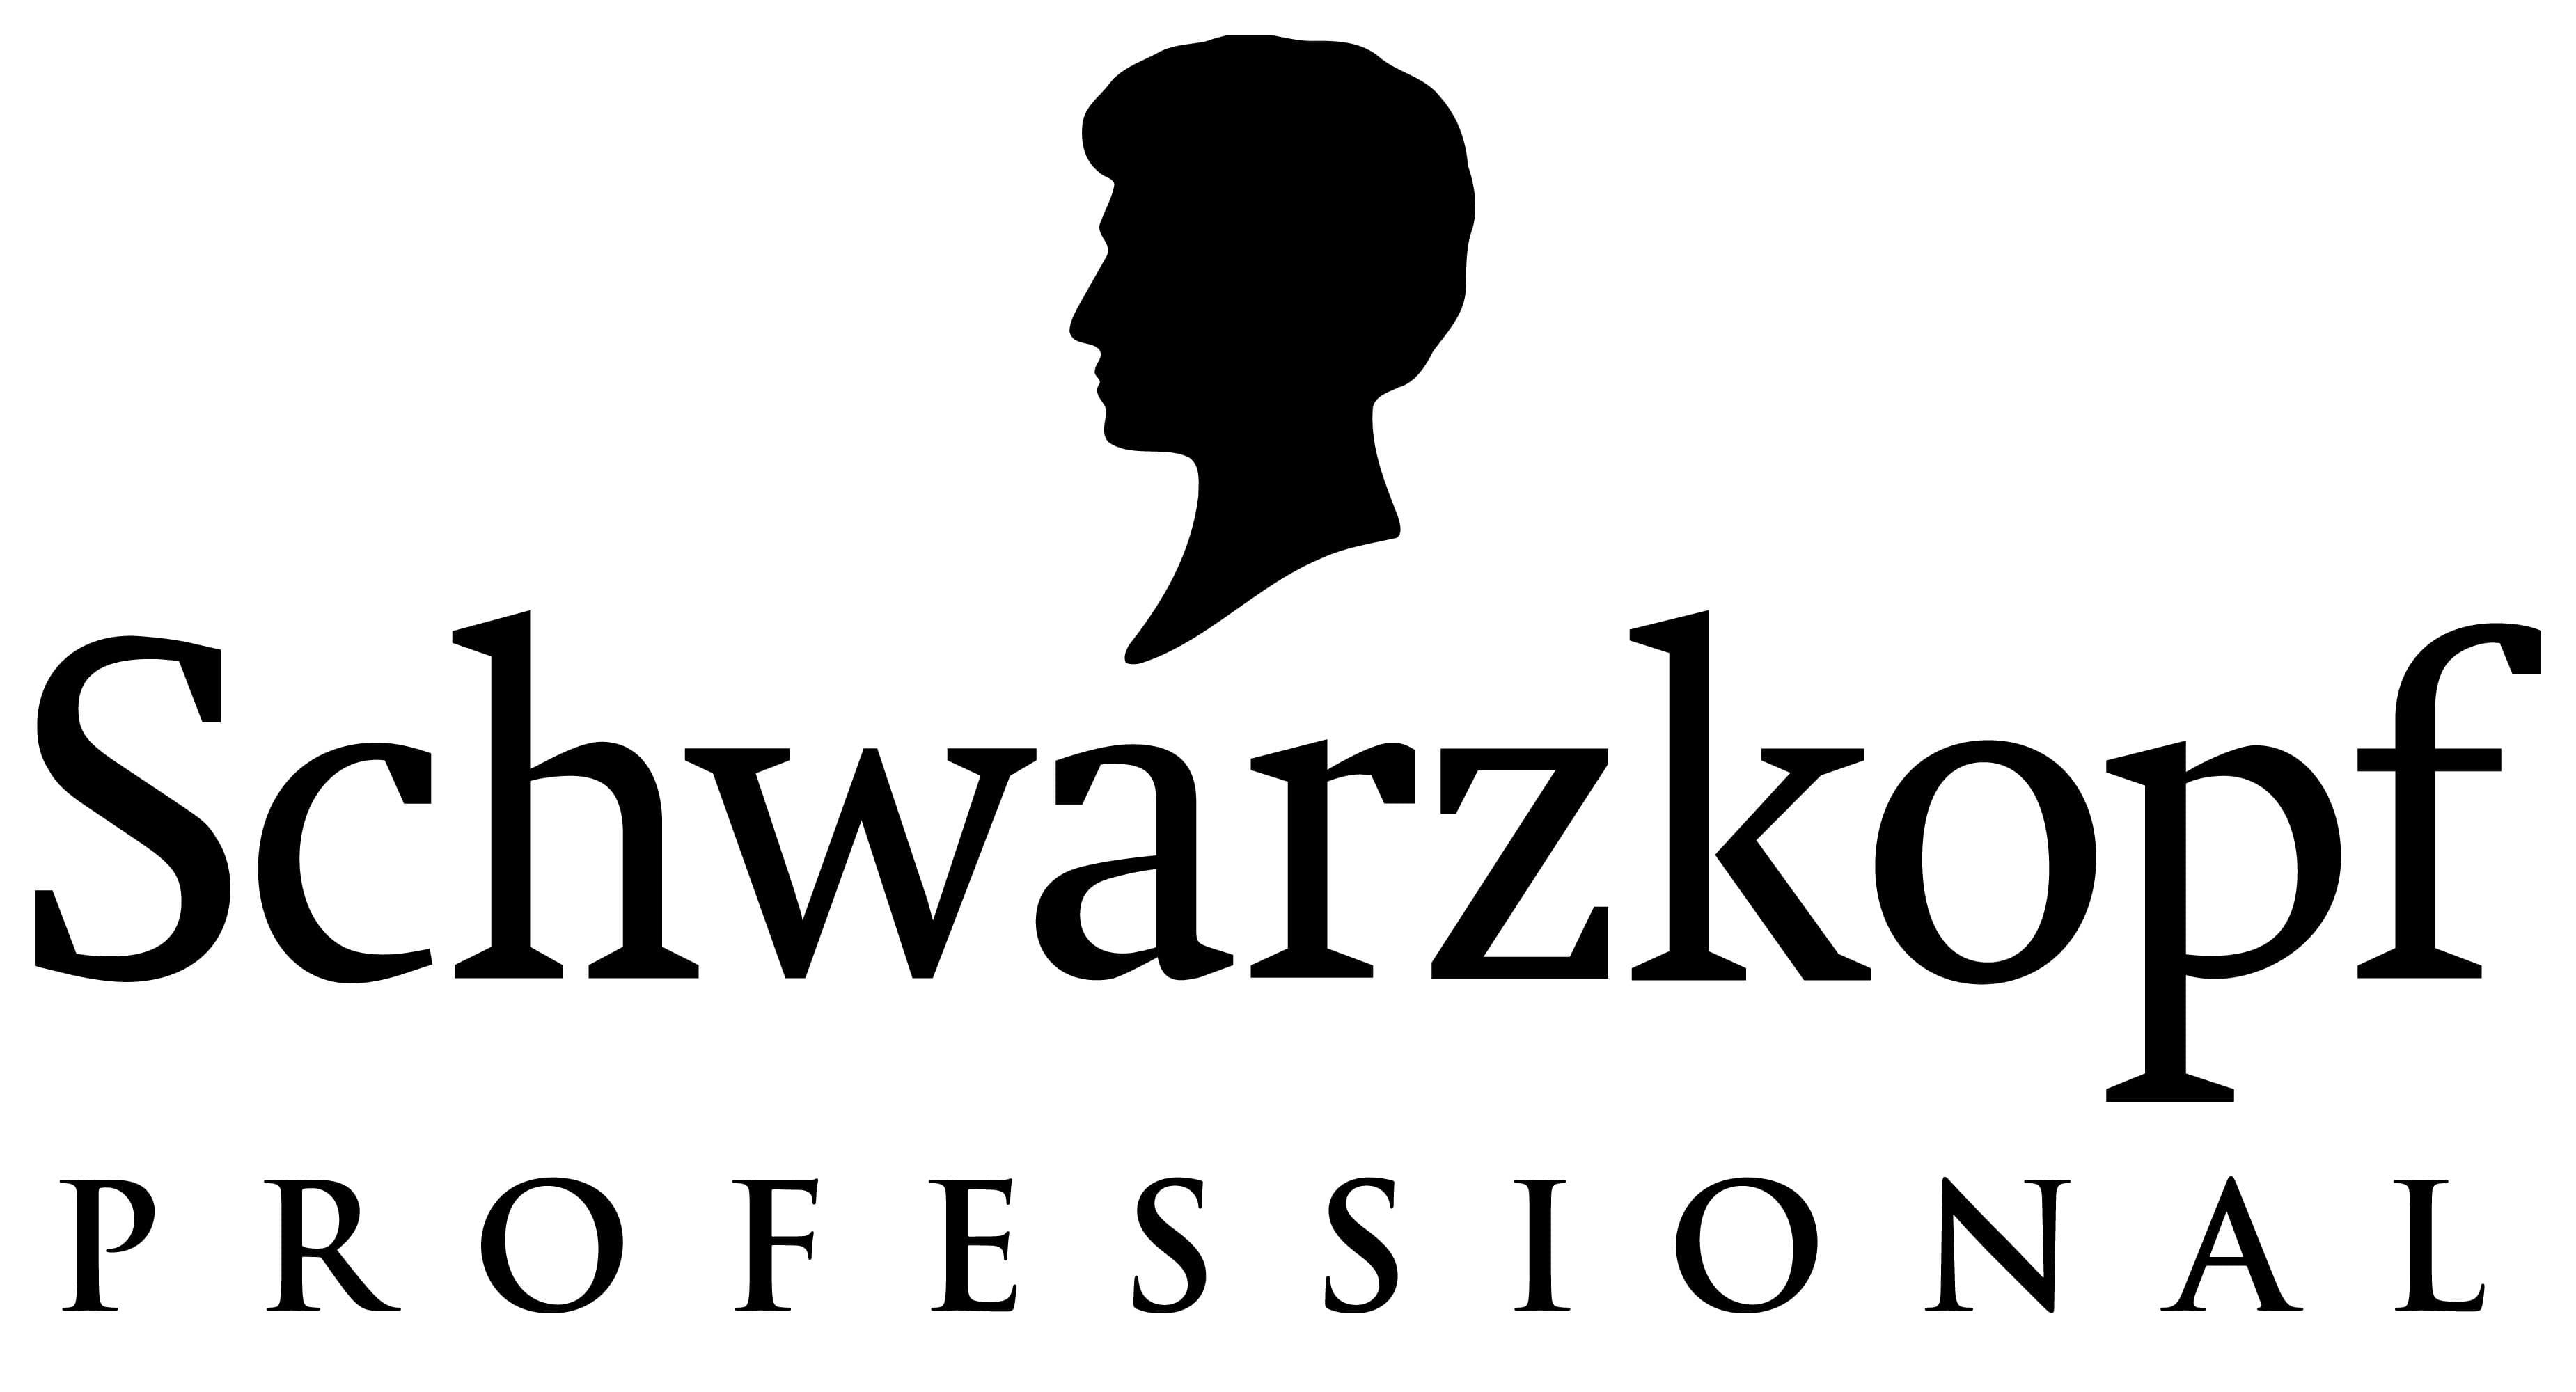 Schwarzkopf Logo and symbol, meaning, history, PNG, brand